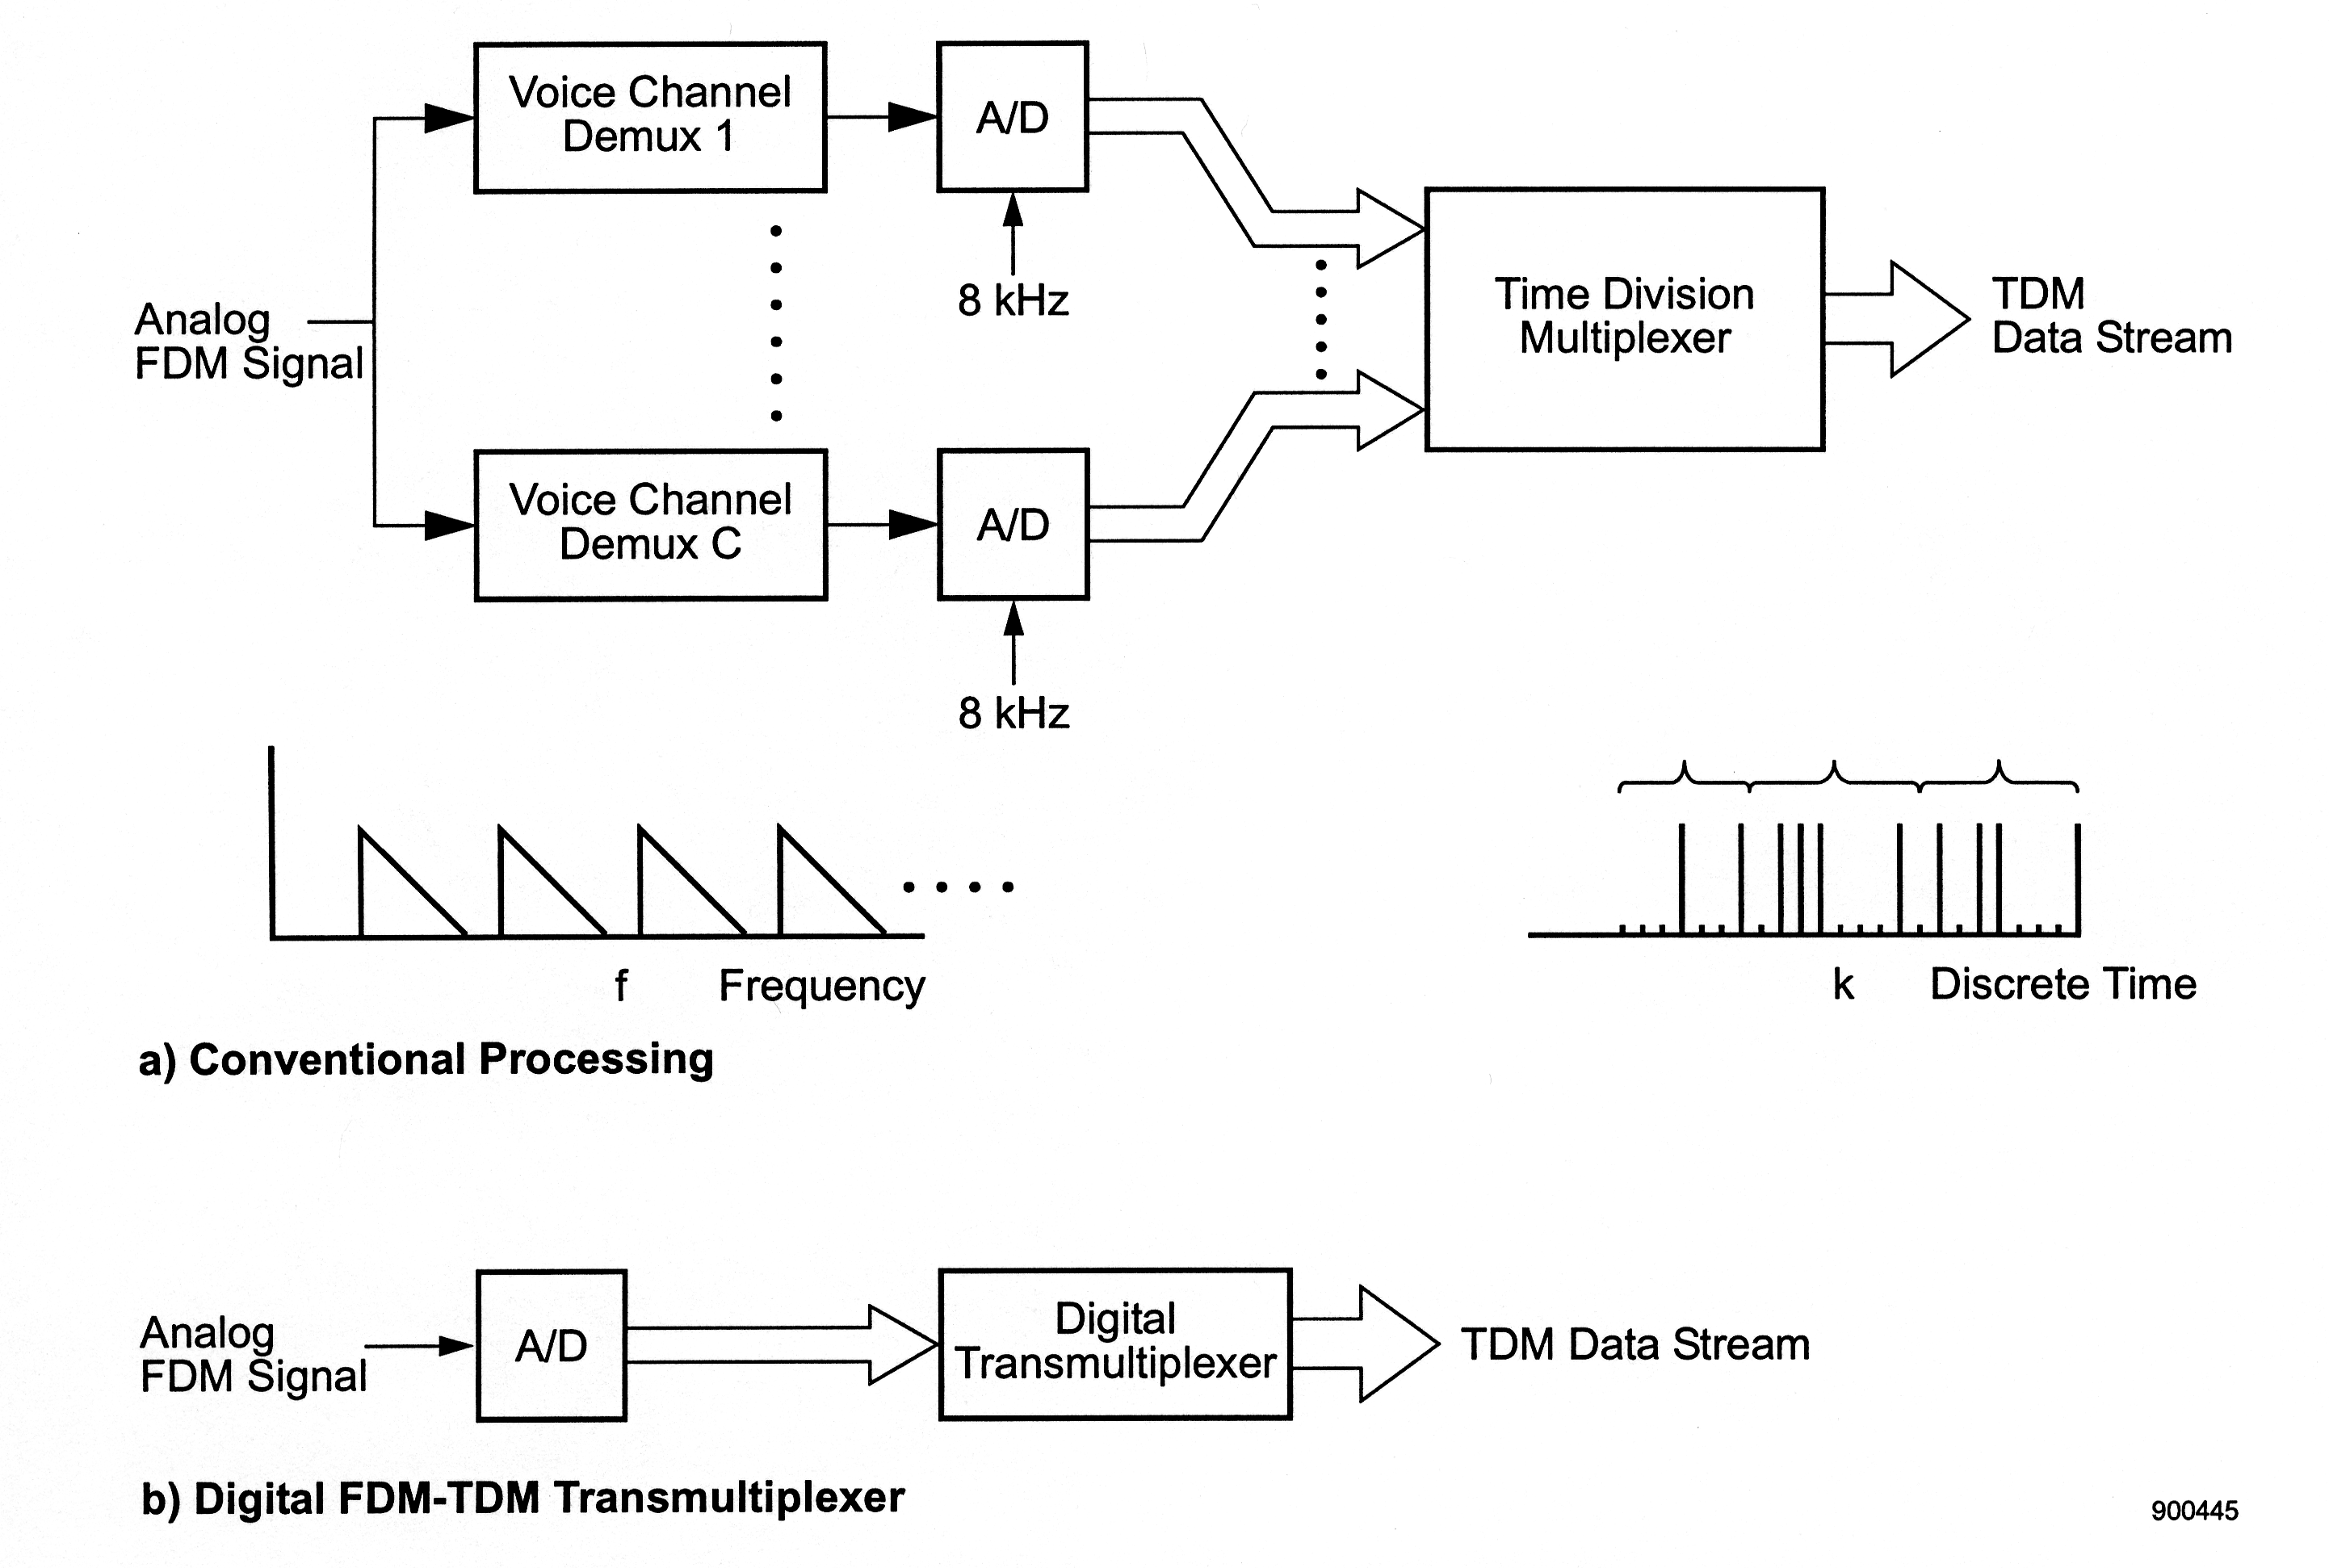 Figure three contains three sub-diagrams. The first is a flow chart with arrows pointing from left to right at labeled boxes along the path. The first two boxes that are positioned on top of each other are labeled with an arrow pointing at both of them, titled Analog FDM Signal. The box on top is labeled Voice Channel Demux 1. In between the boxes are six evenly-spaced small black dots. The box on the bottom is labeled Voice Channel Demux C. To the right of both boxes, pointed at with an arrow, is a box labeled A/D, with a second arrow pointed at the box, titled 8 kHz. After these boxes are larger arrows both pointing at the same larger box, labeled Time Division Multiplexer. In between these arrows are five evenly-spaced small black dots. After this large box is an arrow pointing at the title TDM Data Stream. The second sub-diagram, labeled a) Conventional Processing, consists of two separate graphs. The first plots frequency, f, on the horizontal axis, and shows a graph with vertical lines from the horizontal axis in the first quadrant, followed by a sharp vertex in each and a diagonal line with negative slope returning to the axis, thus forming a series of right triangles. The second plots discrete time, k, on the horizontal axis, and shows a number of unevenly-spaced vertical lines, sorted into three sections by brackets above them. There are nine such vertical lines on the graph. The third sub-diagram is another flow chart. The first title reads, Analog FDM Signal. This is followed by an arrow pointing right to a box labeled A/D. This is followed by a larger arrow pointing to the right at a box labeled Digital Transmultiplexer. This points again to the right with a larger arrow at the words TDM Data Stream.